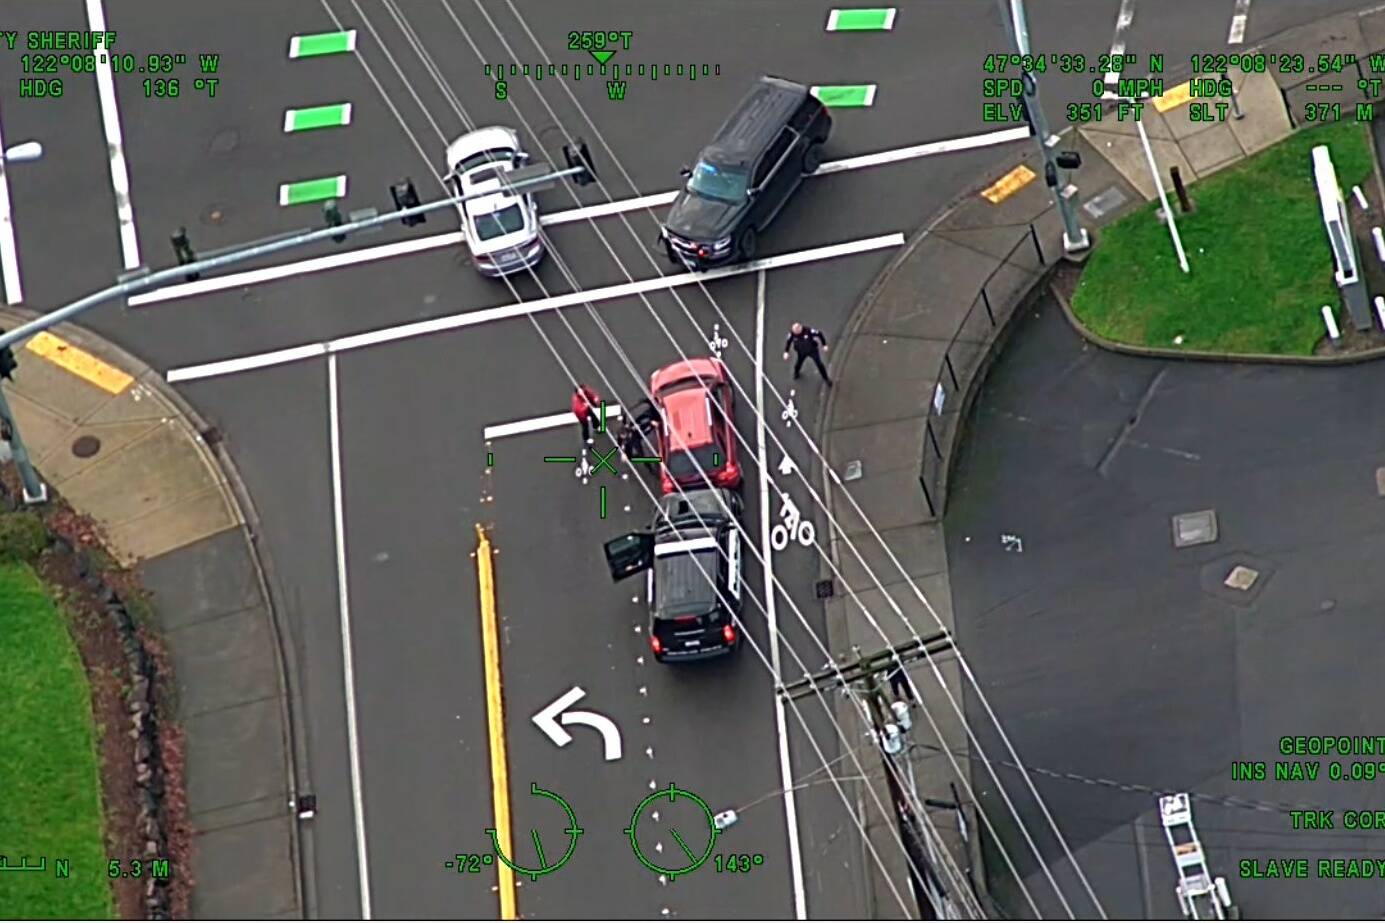 Guardian One footage from January 2022 shows an Issaquah police officer attempting to remove suspect from stolen vehicle but gets run over in the process. Courtesy of King County Sheriff’s Office Air Support